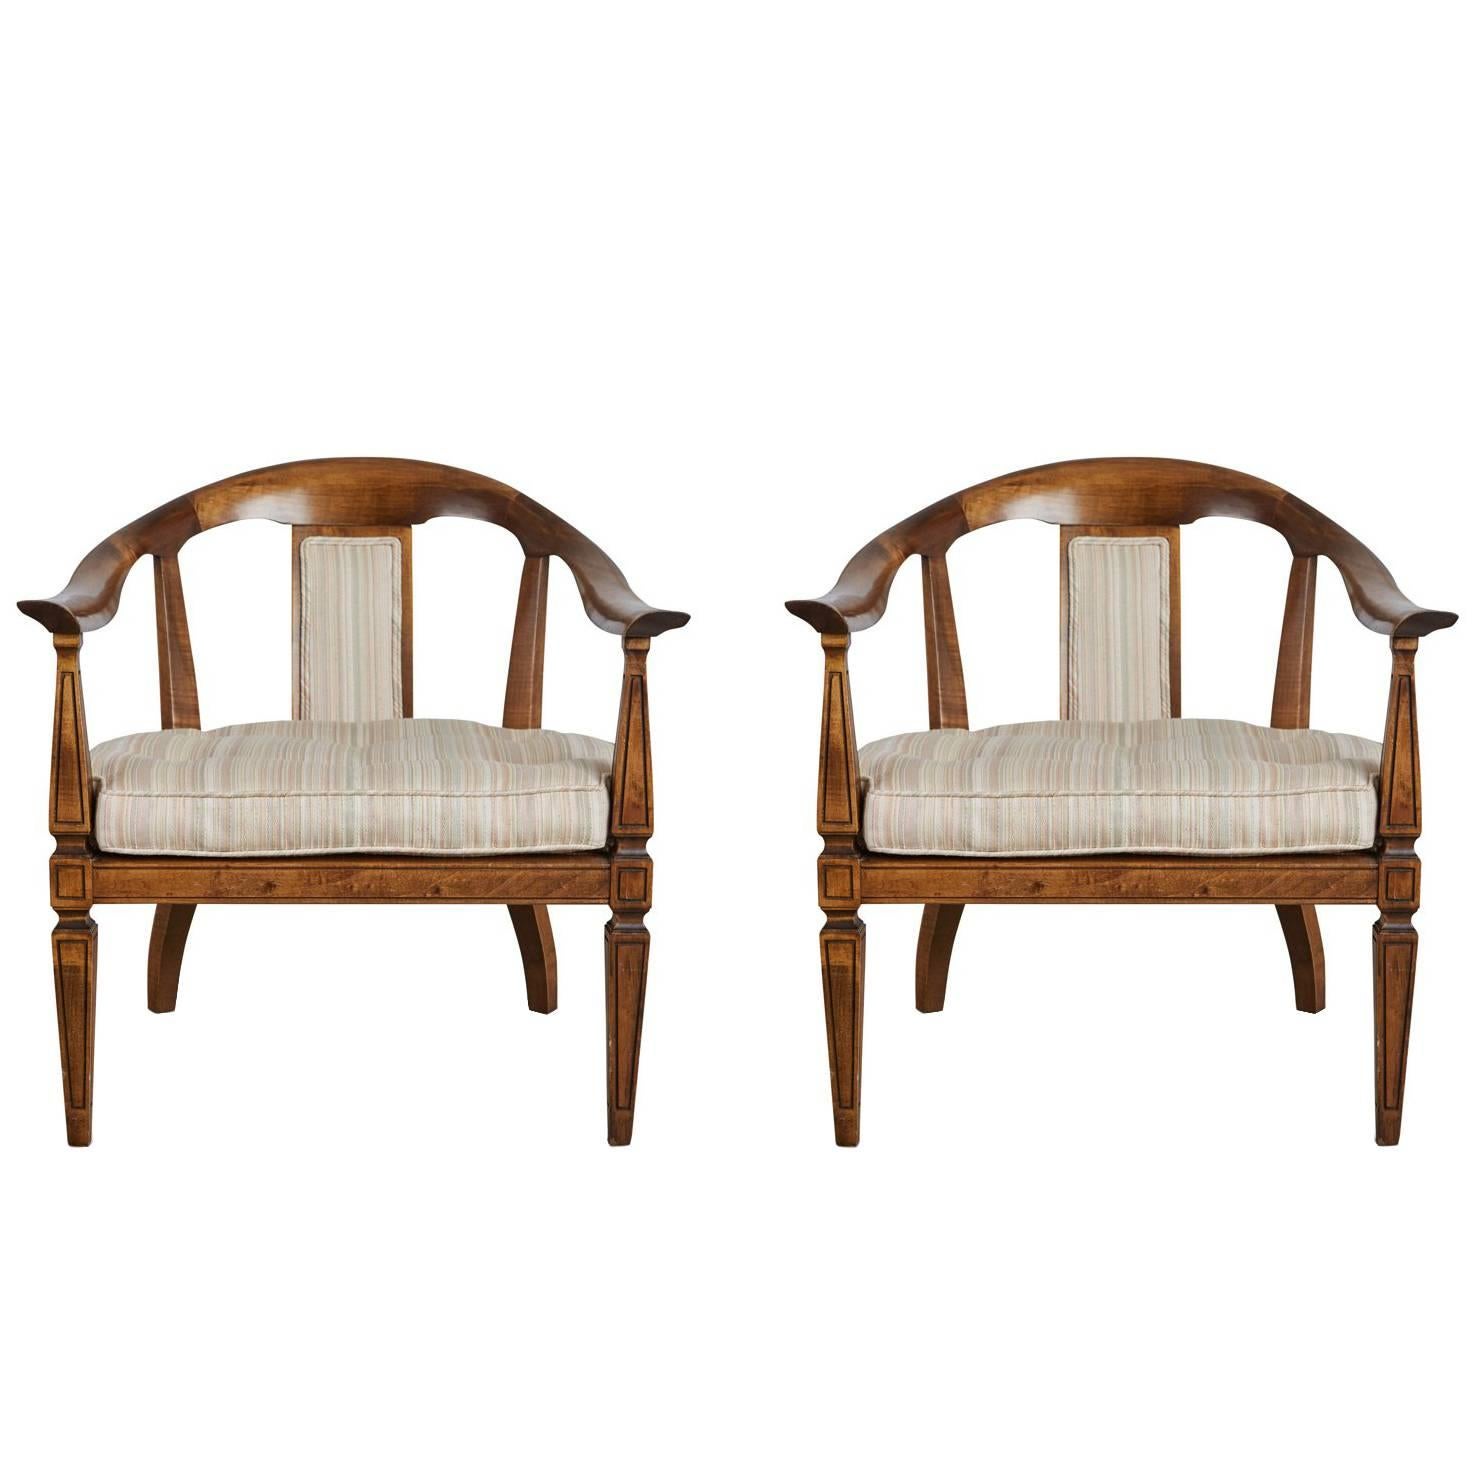 Pair of Cane and Walnut Armchairs, circa 1960